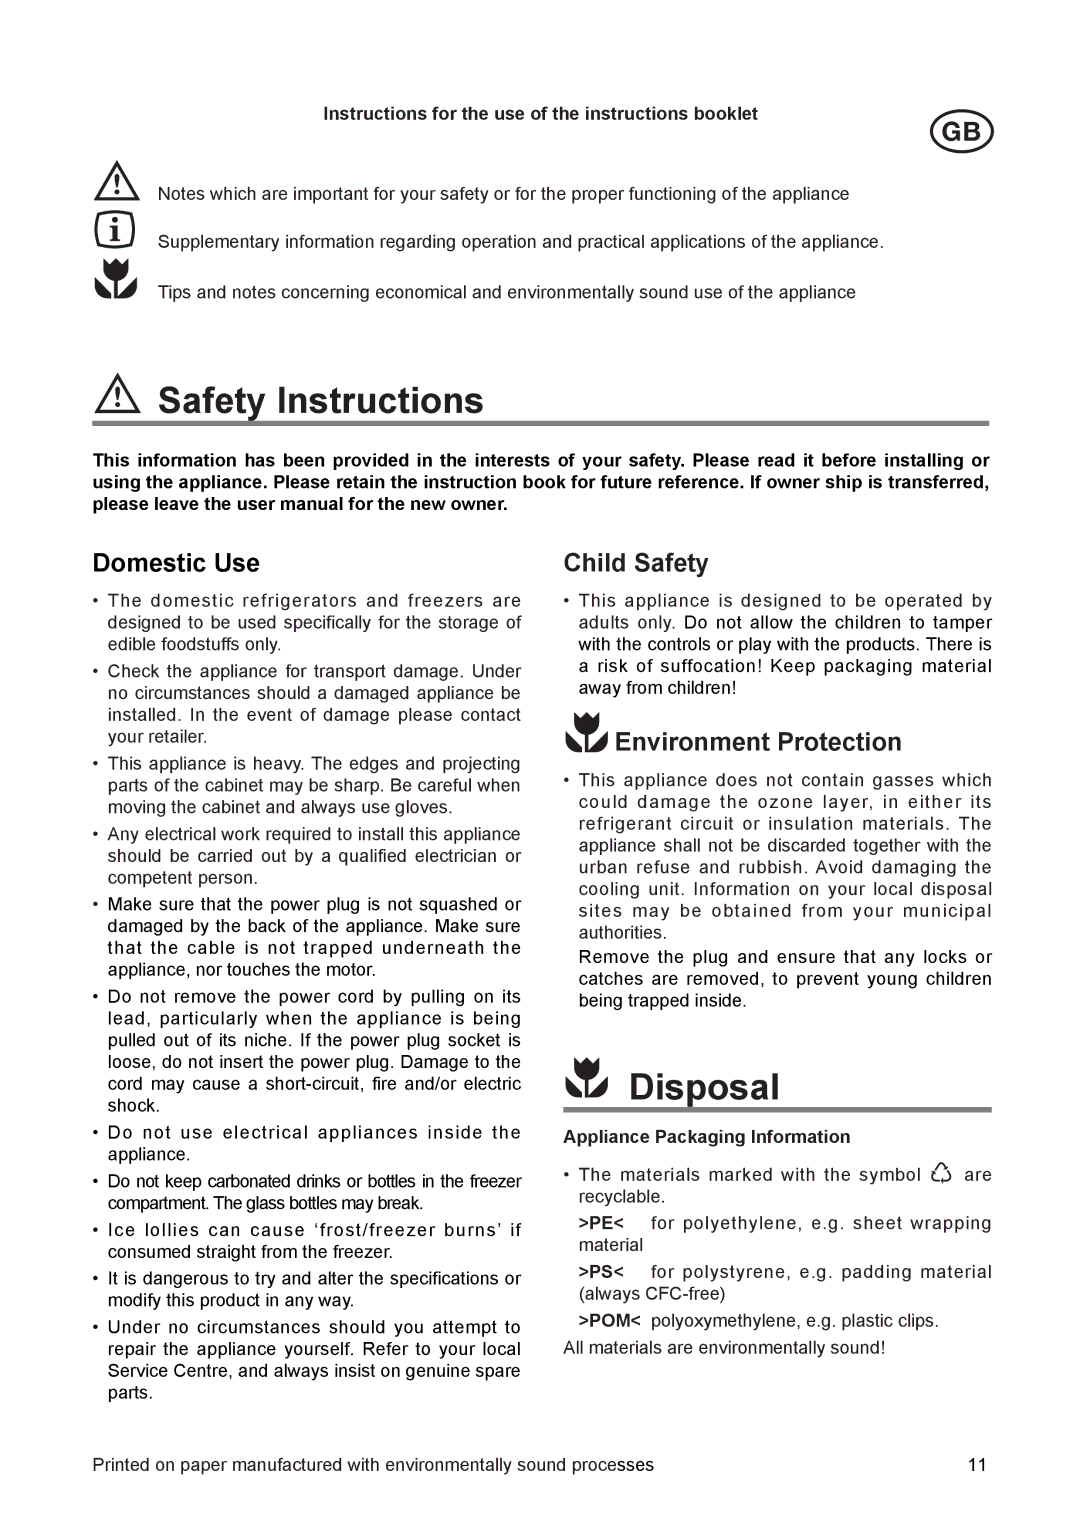 Electrolux ERN 23500, ERN 16300 manual Safety Instructions, Disposal, Domestic Use, Child Safety, Environment Protection 